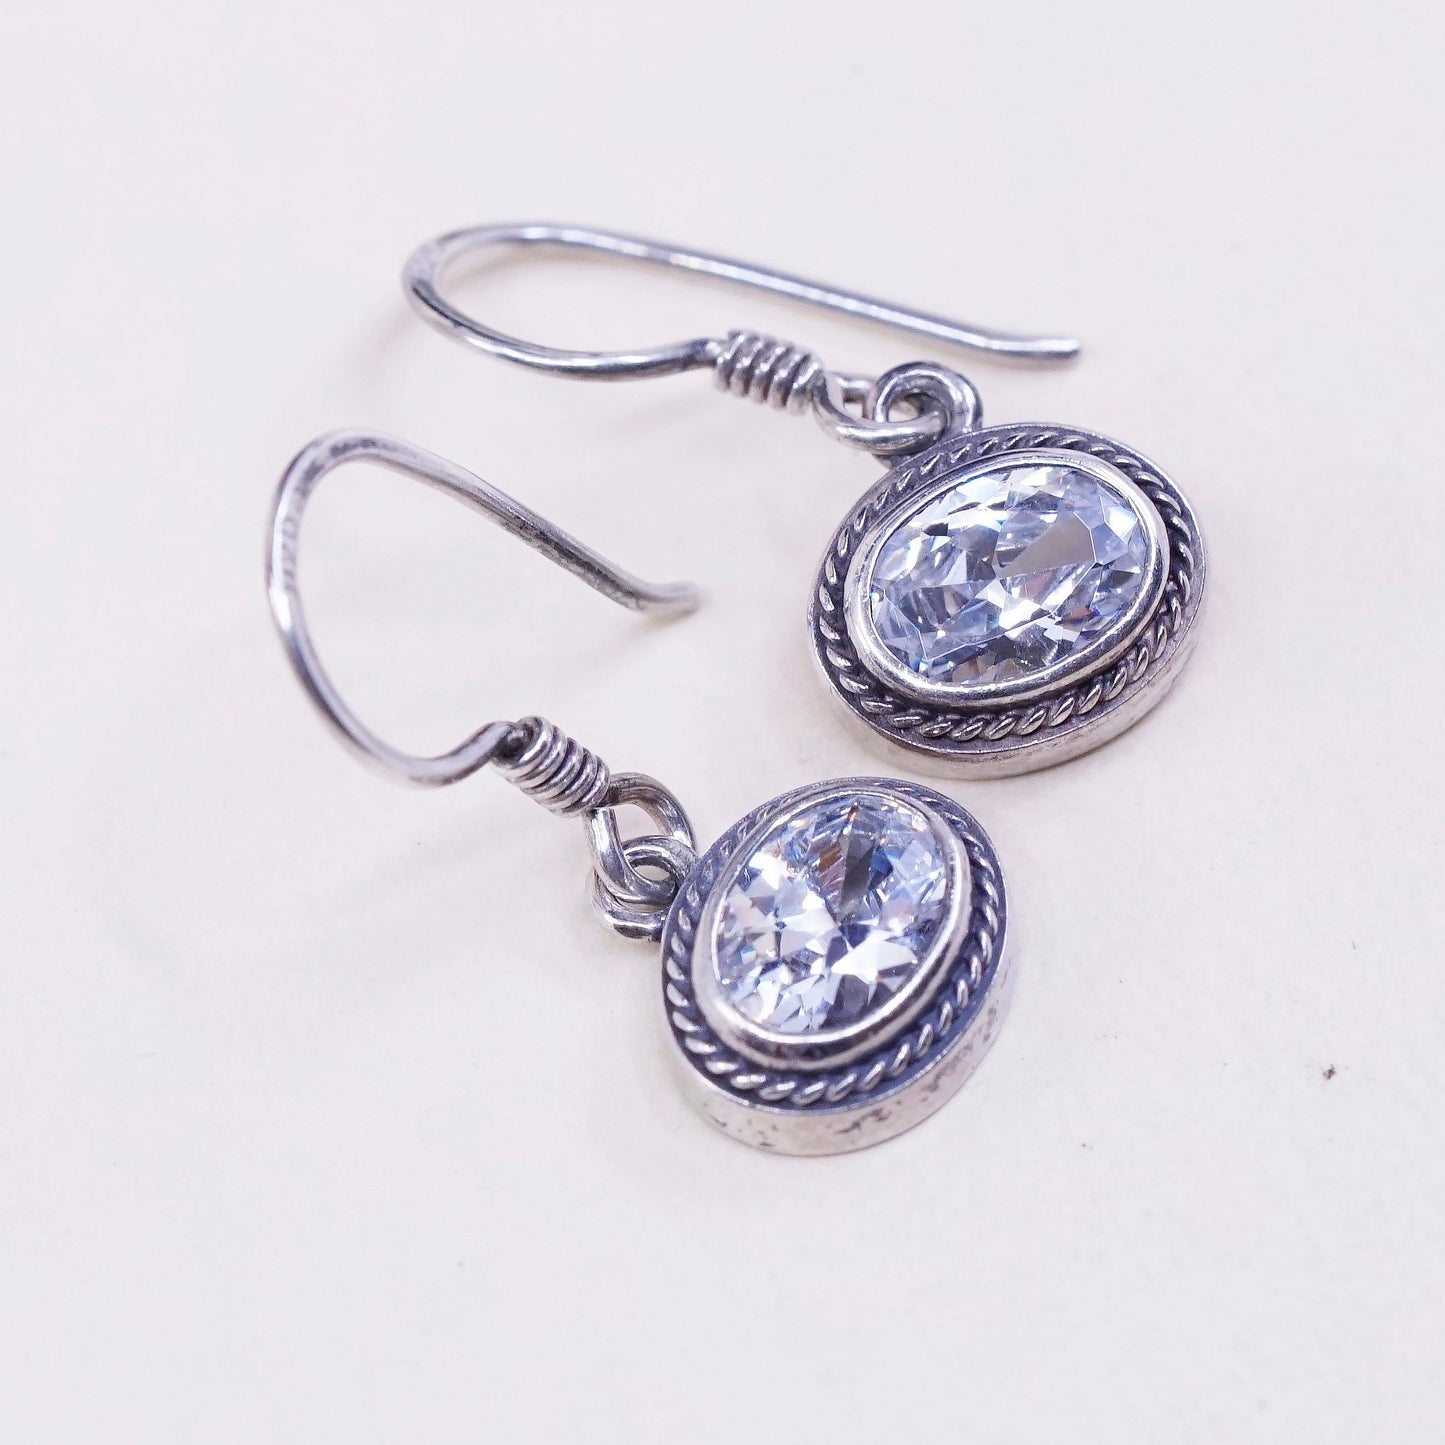 Vintage sterling silver handmade earrings, 925 silver with oval CZ, stamped 925